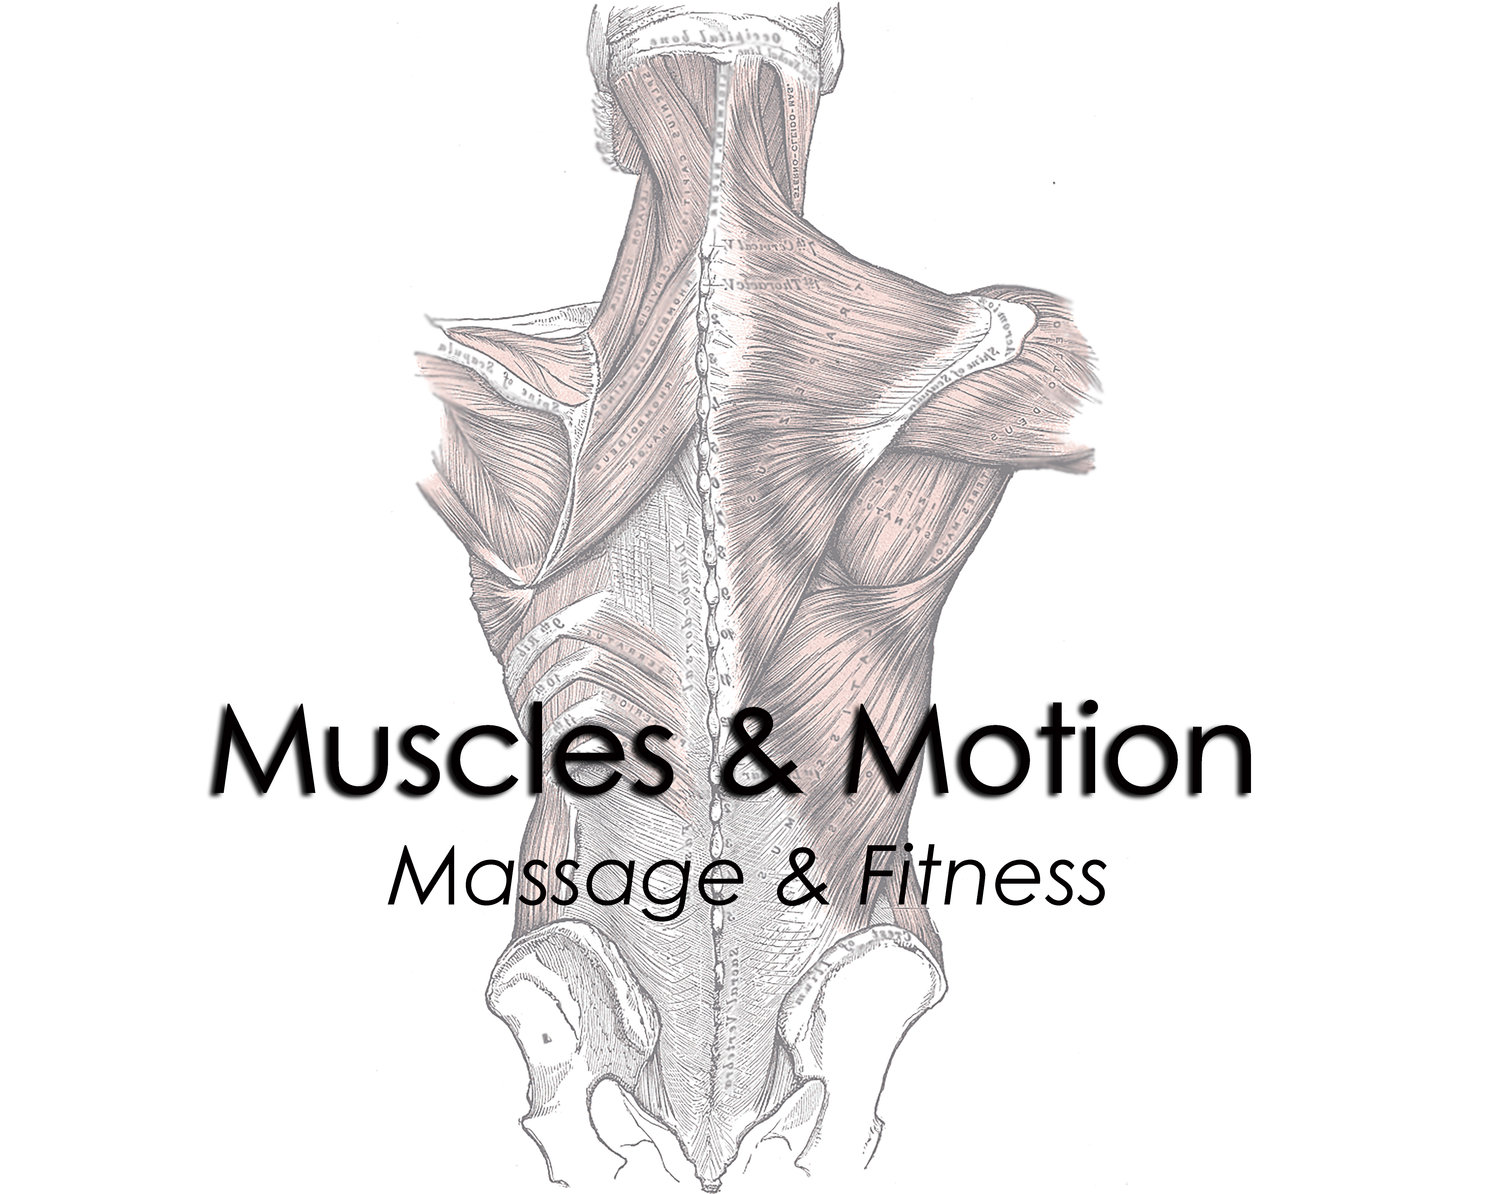 Muscles & Motion